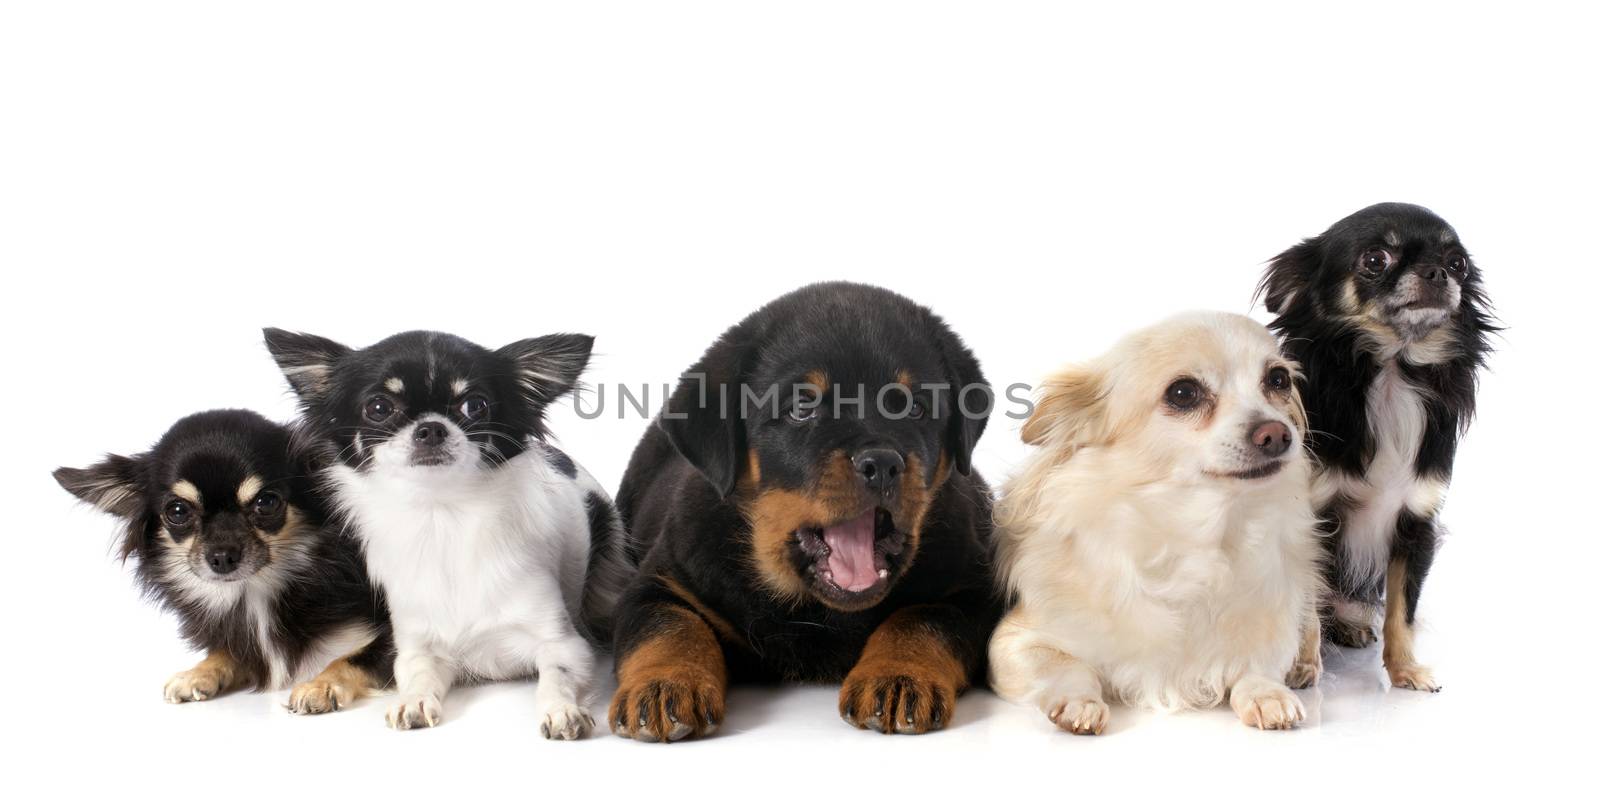 puppy rottweiler and chihuahuas by cynoclub